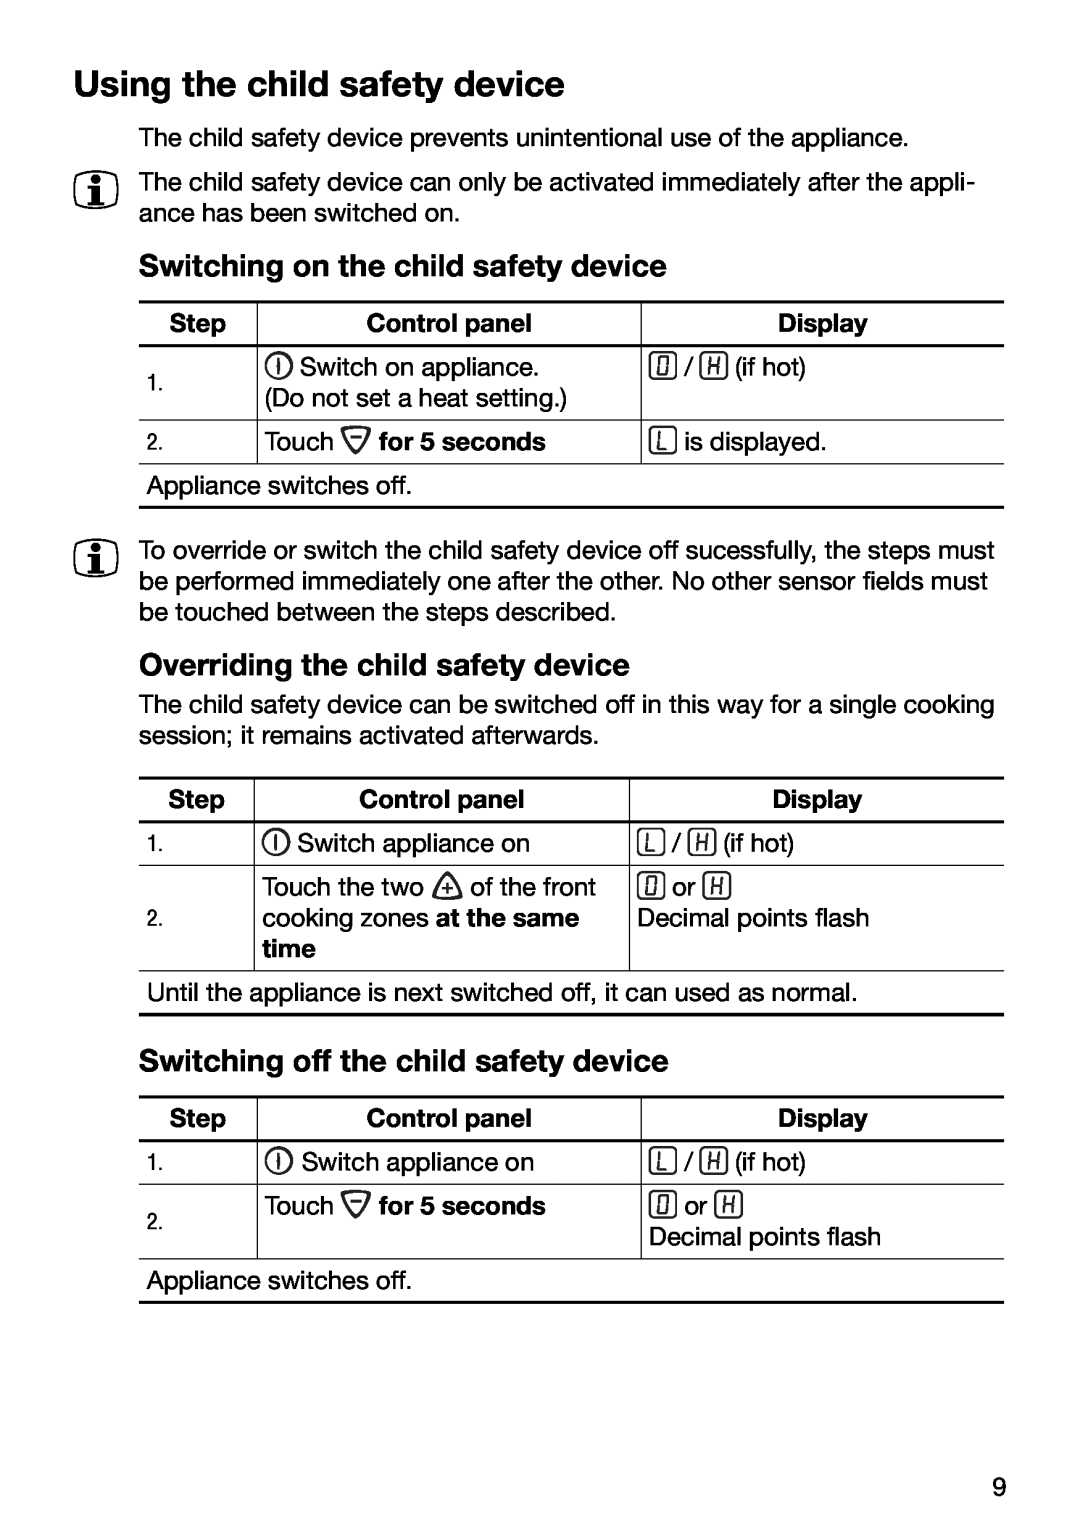 Electrolux TBC 651 X installation instructions Using the child safety device, Switching on the child safety device 